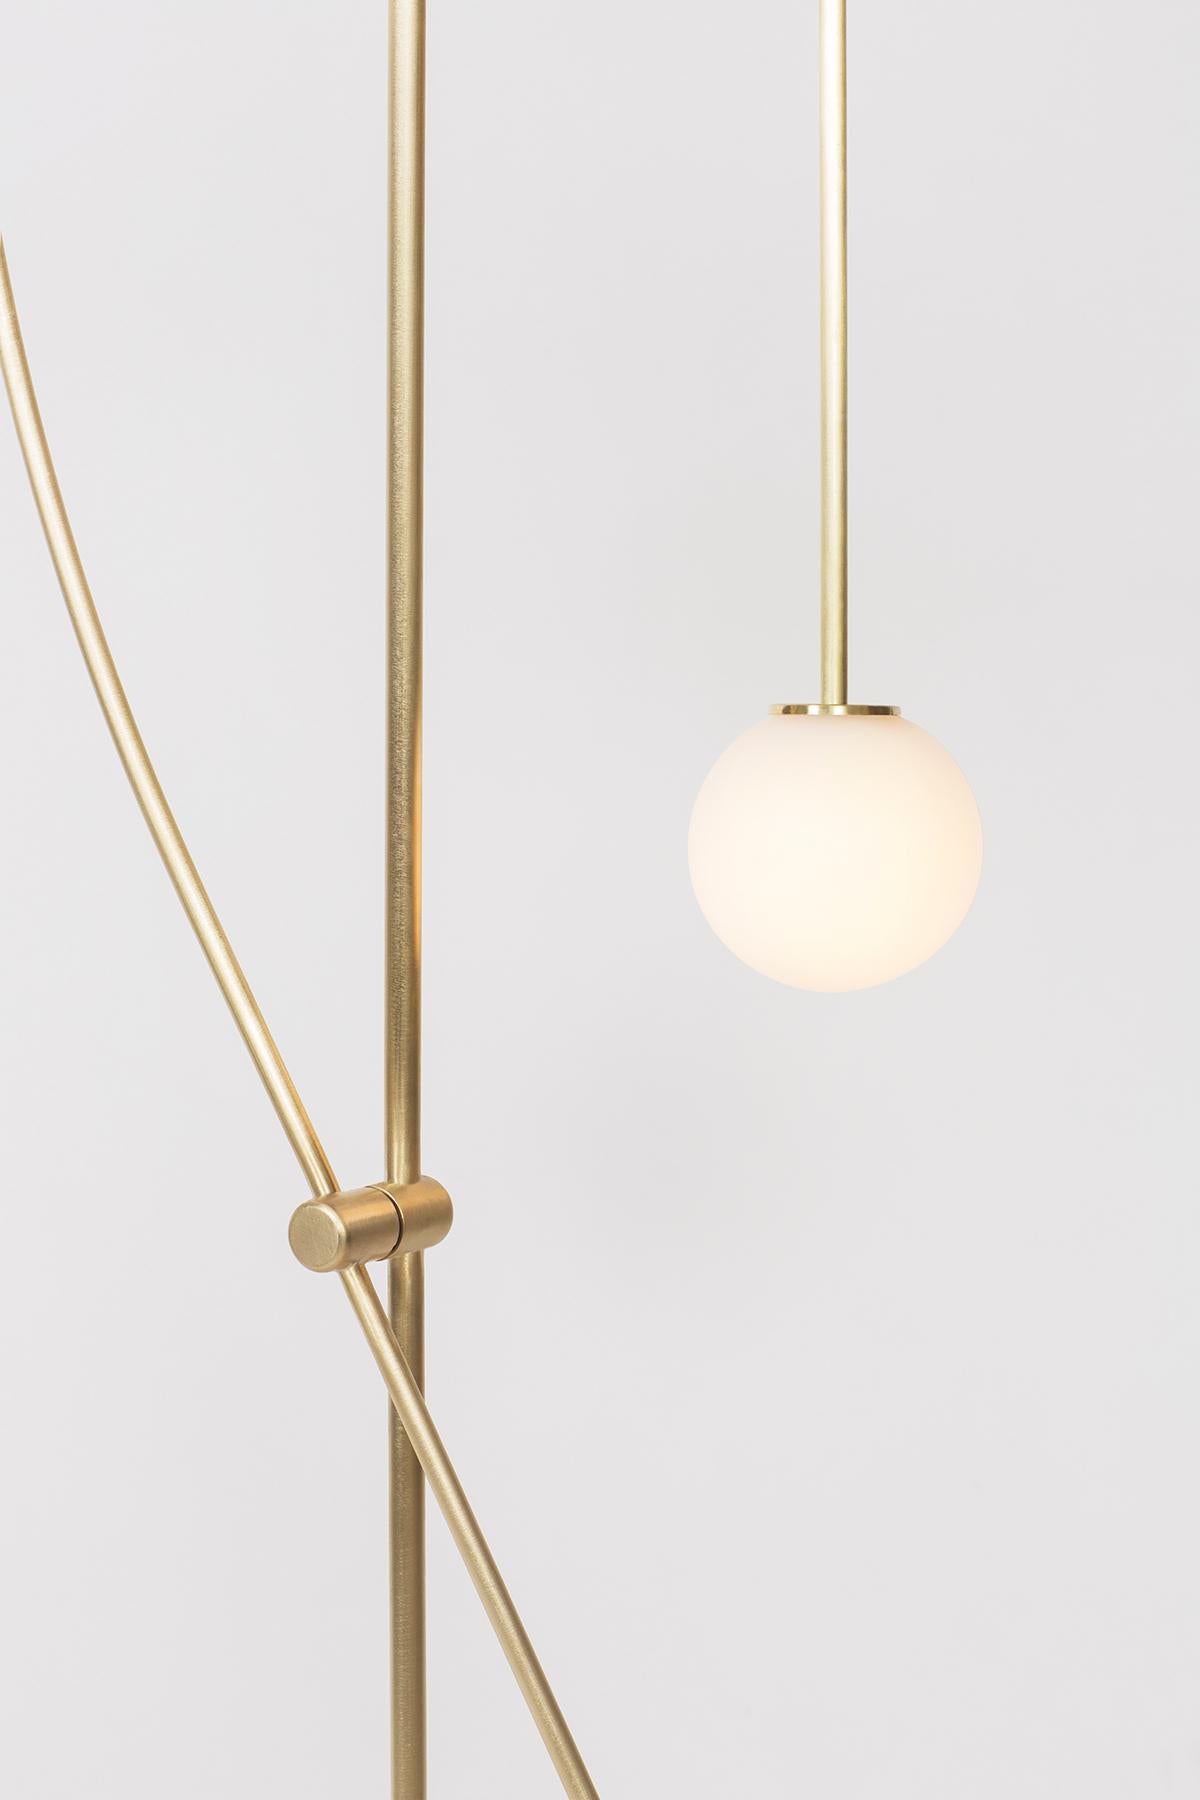 Contemporary 8' Tall Tempo Chandelier in Brass with Handblown Glass Globes For Sale